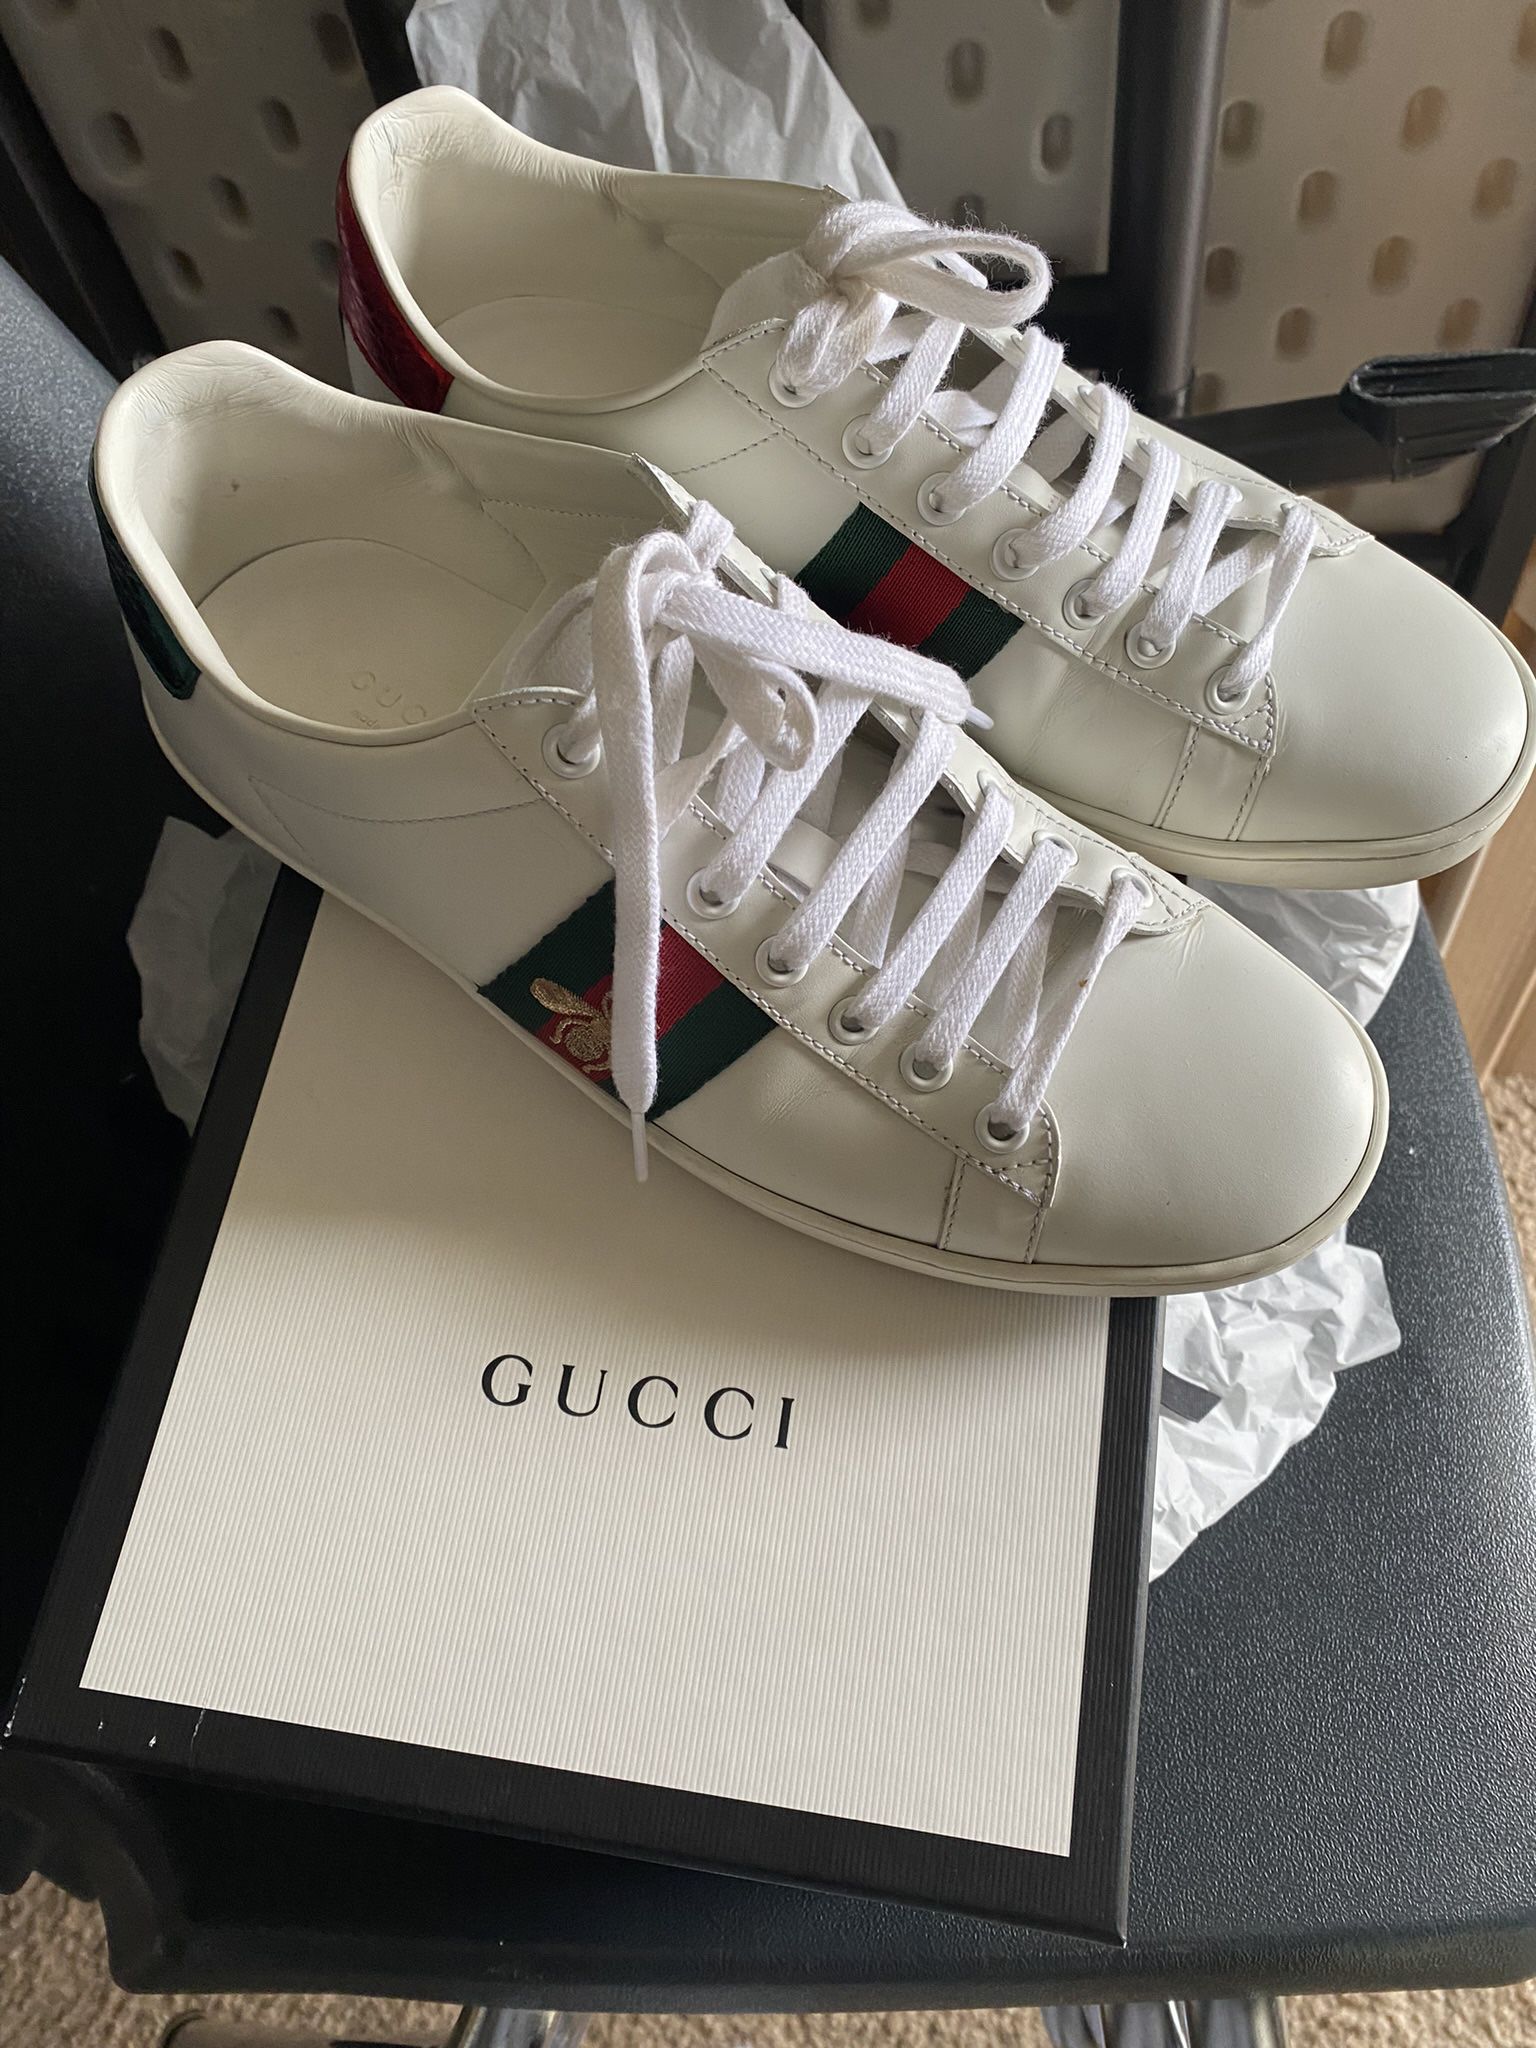 Gucci Authentic Size 39 Women’s (Great Condition)